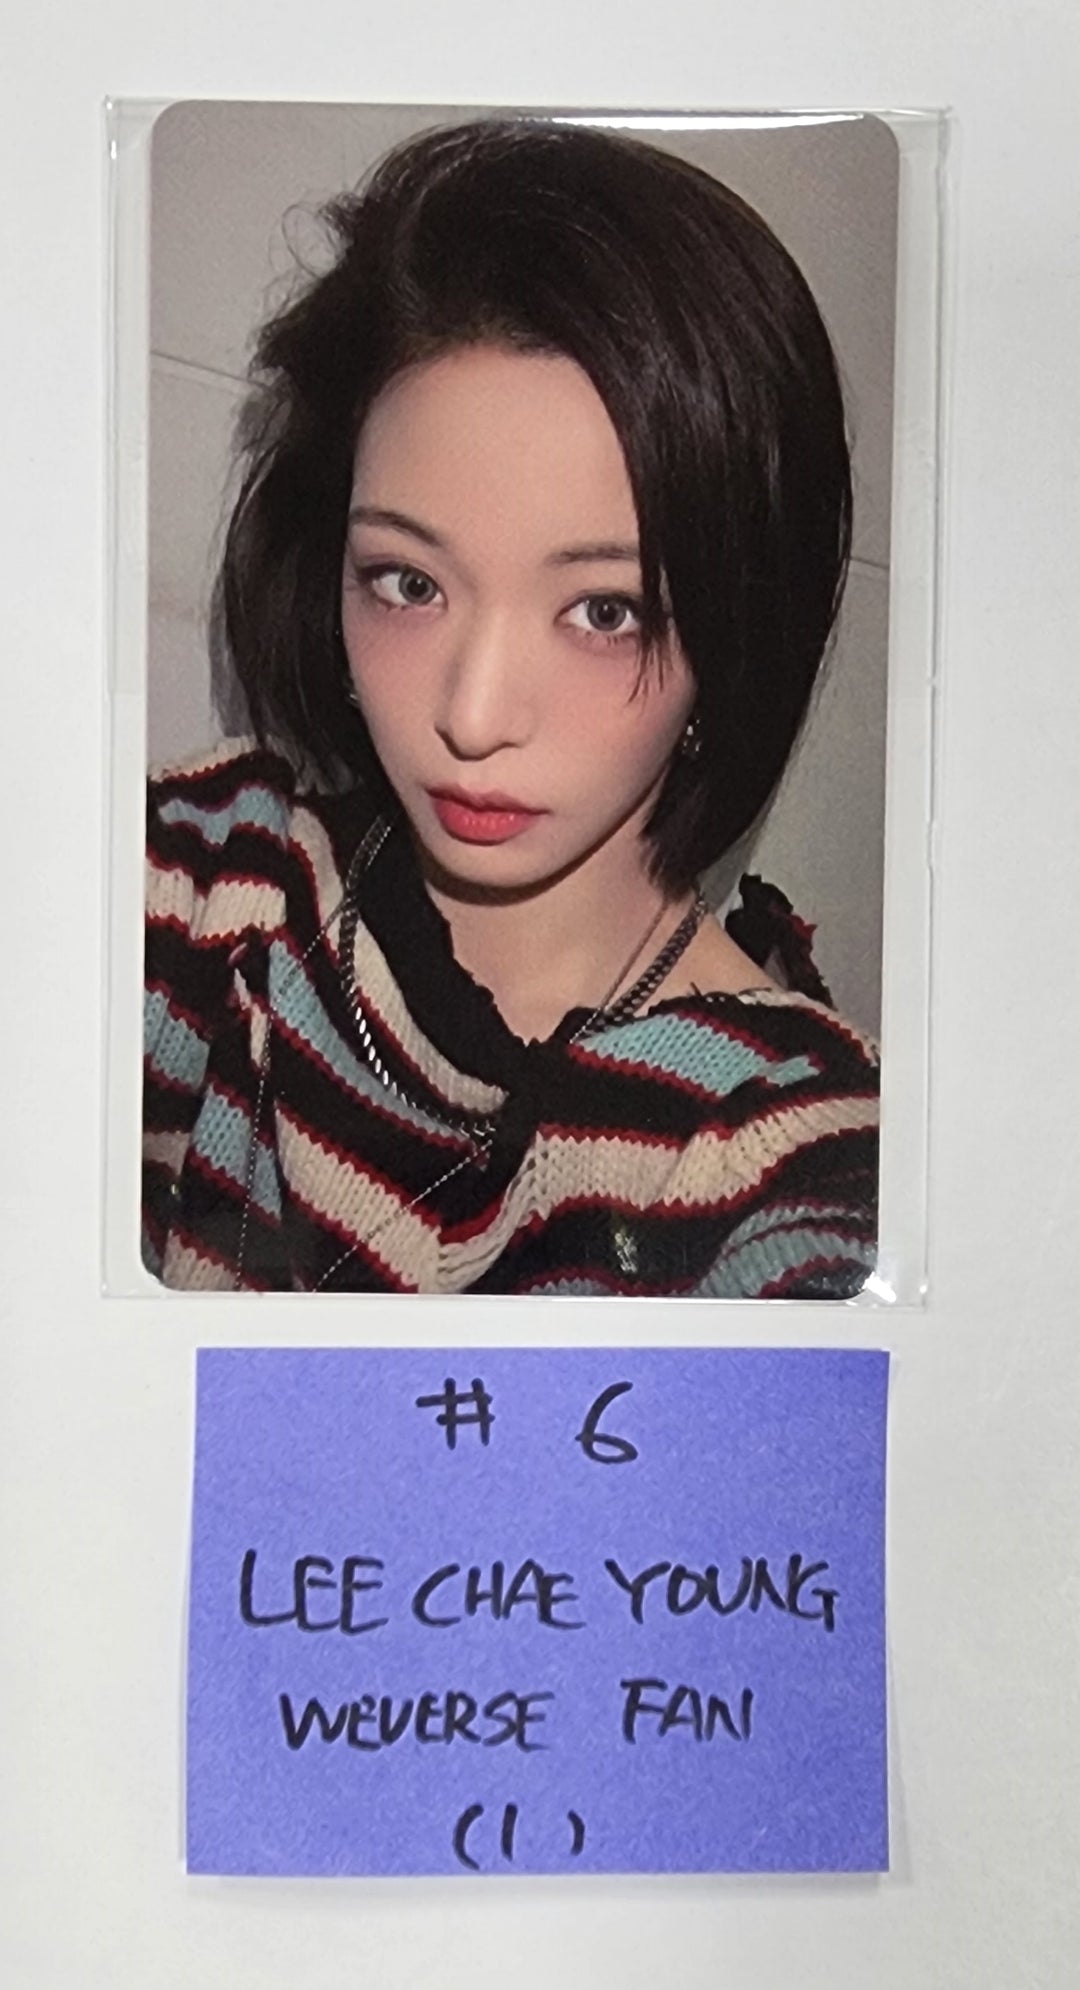 fromis_9 "Unlock My World" - Weverse Shop Fansign Event Photocard [Restocked 6/8]